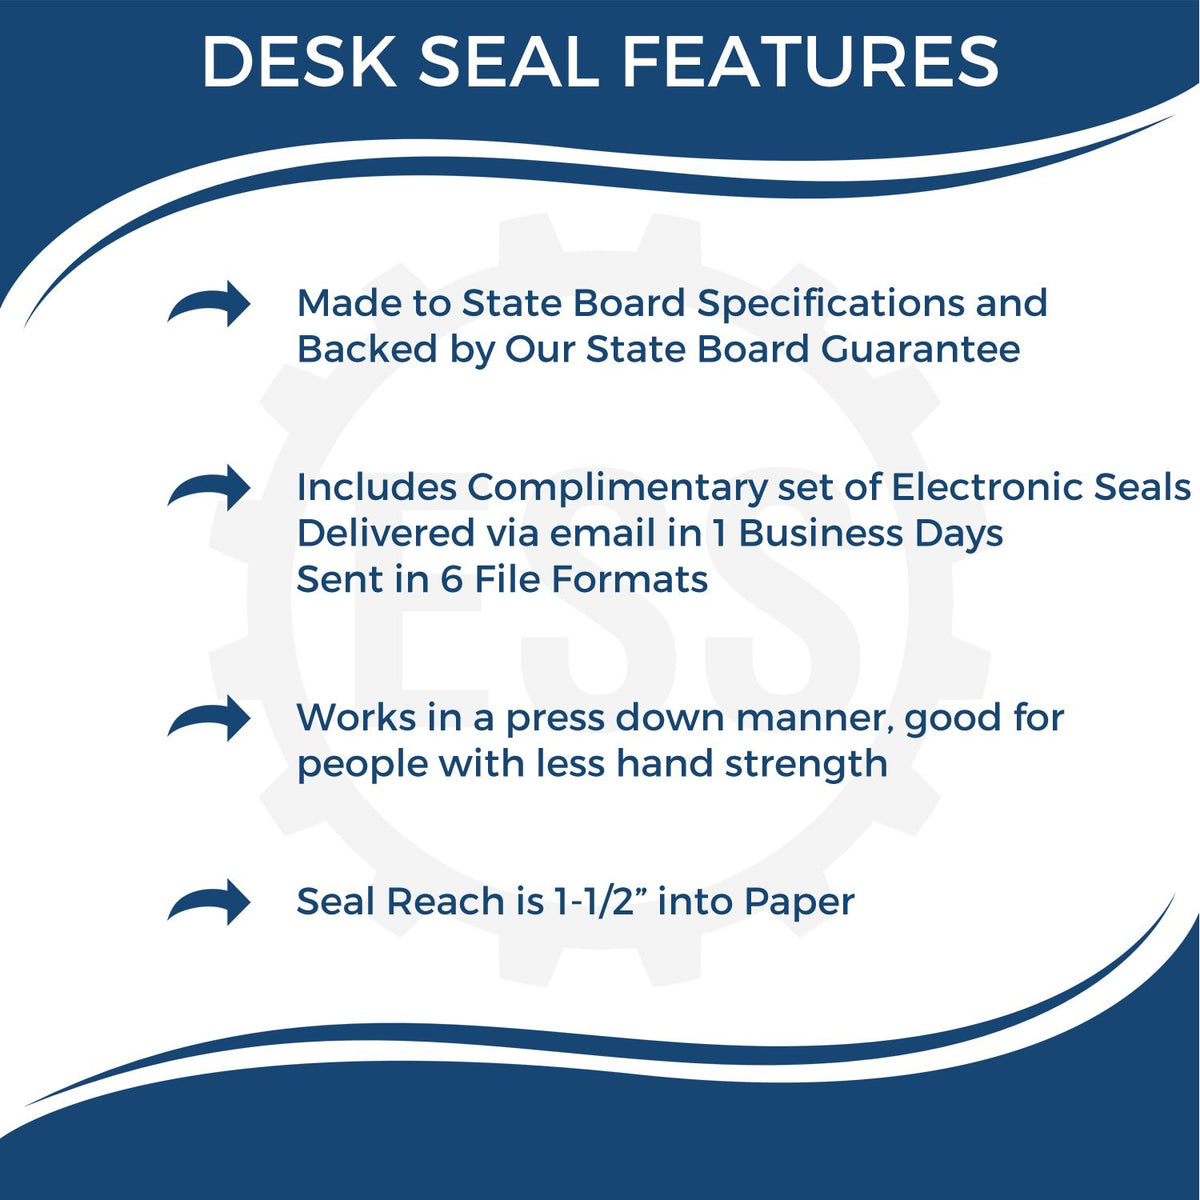 A picture of an infographic highlighting the selling points for the New York Geologist Desk Seal